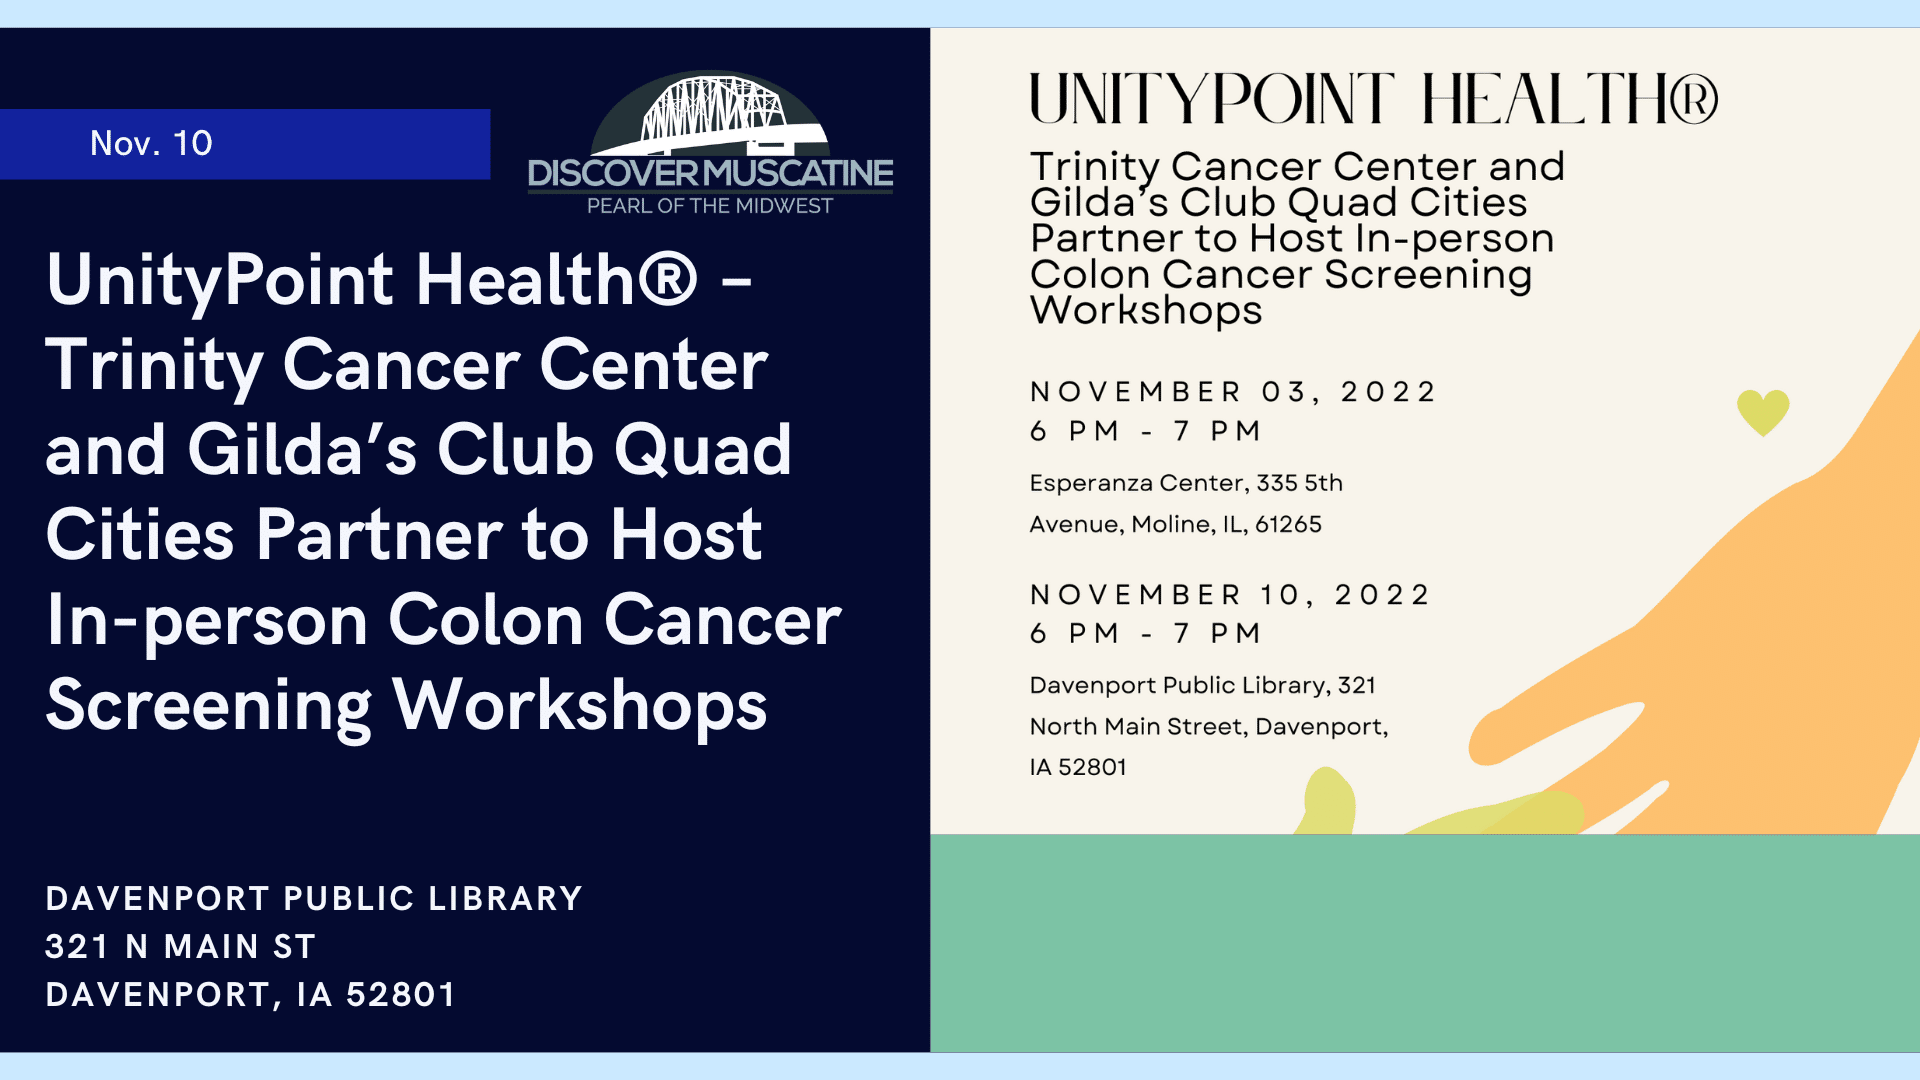 UnityPoint Health® – Trinity Cancer Center and Gilda’s Club Quad Cities Partner to Host In-person Colon Cancer Screening Workshops